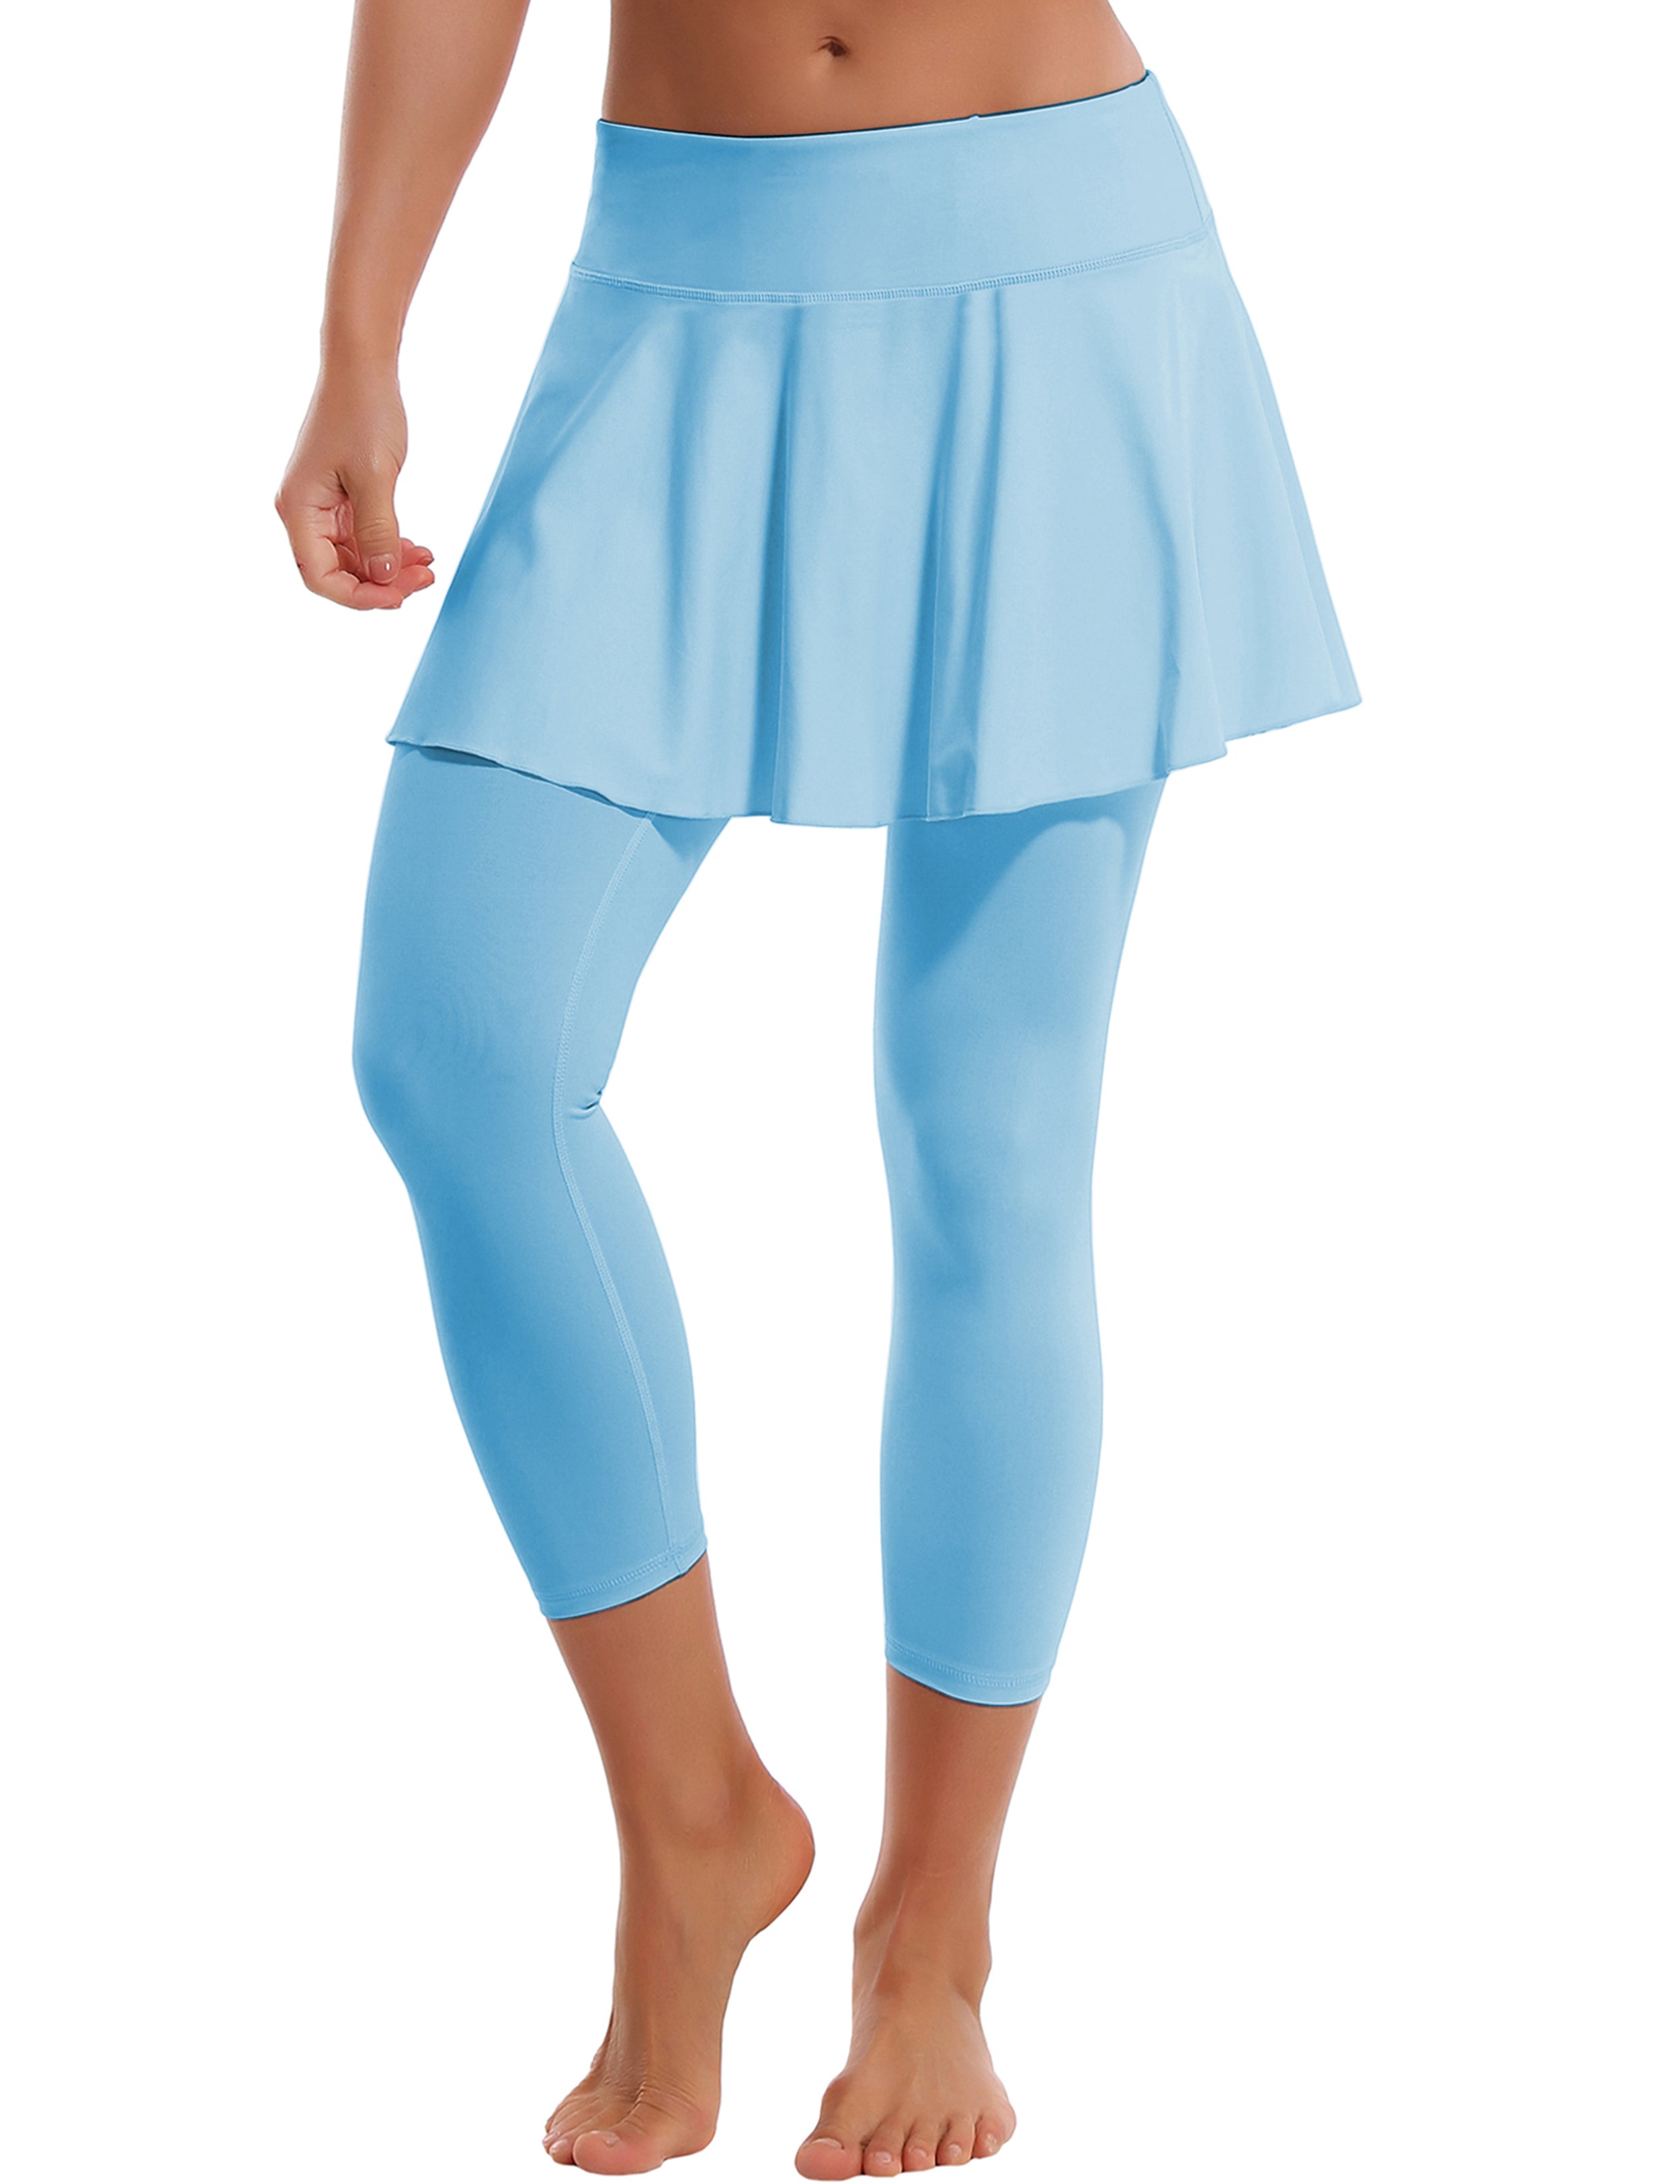 19" Capris Tennis Golf Skirted Leggings with Pockets blue 80%Nylon/20%Spandex UPF 50+ sun protection Elastic closure Lightweight, Wrinkle Moisture wicking Quick drying Secure & comfortable two layer Hidden pocket